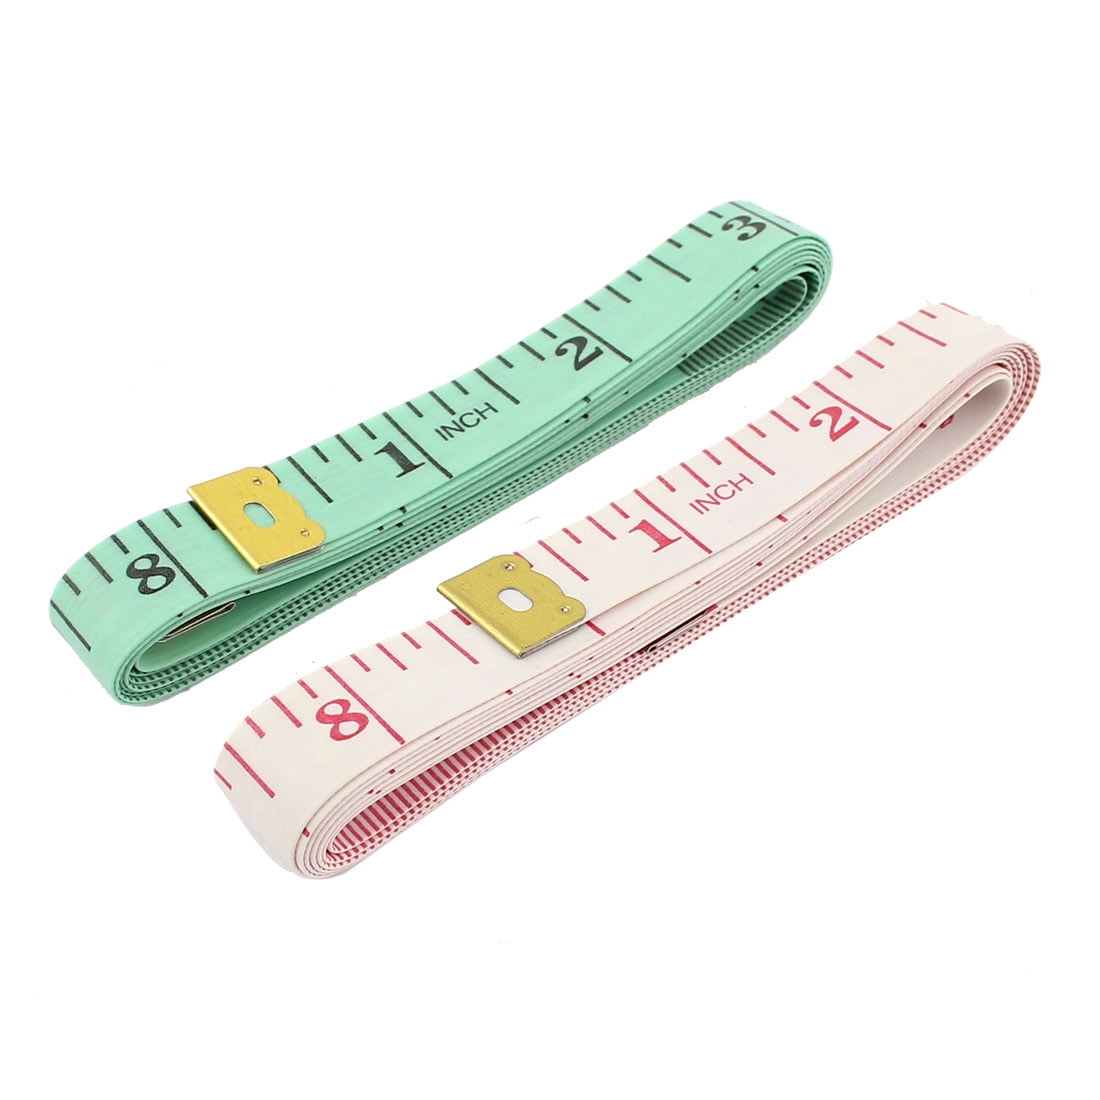 Junipers Soft Vinyl 120" Sewing Tailoring Craft Tape Measure Assorted Pack of 3 